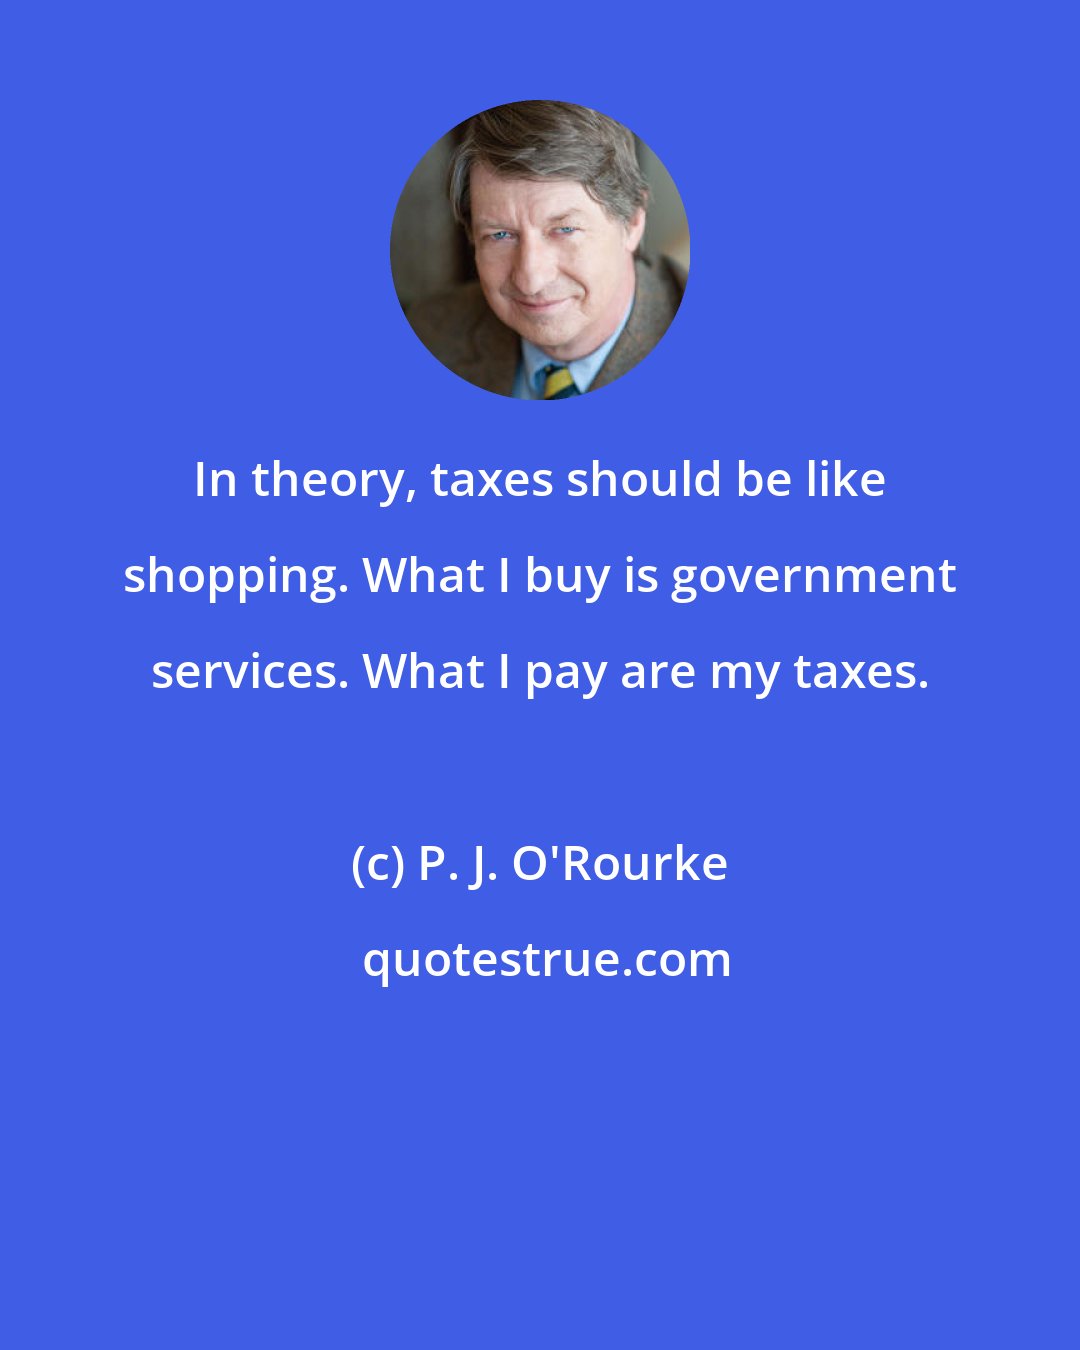 P. J. O'Rourke: In theory, taxes should be like shopping. What I buy is government services. What I pay are my taxes.